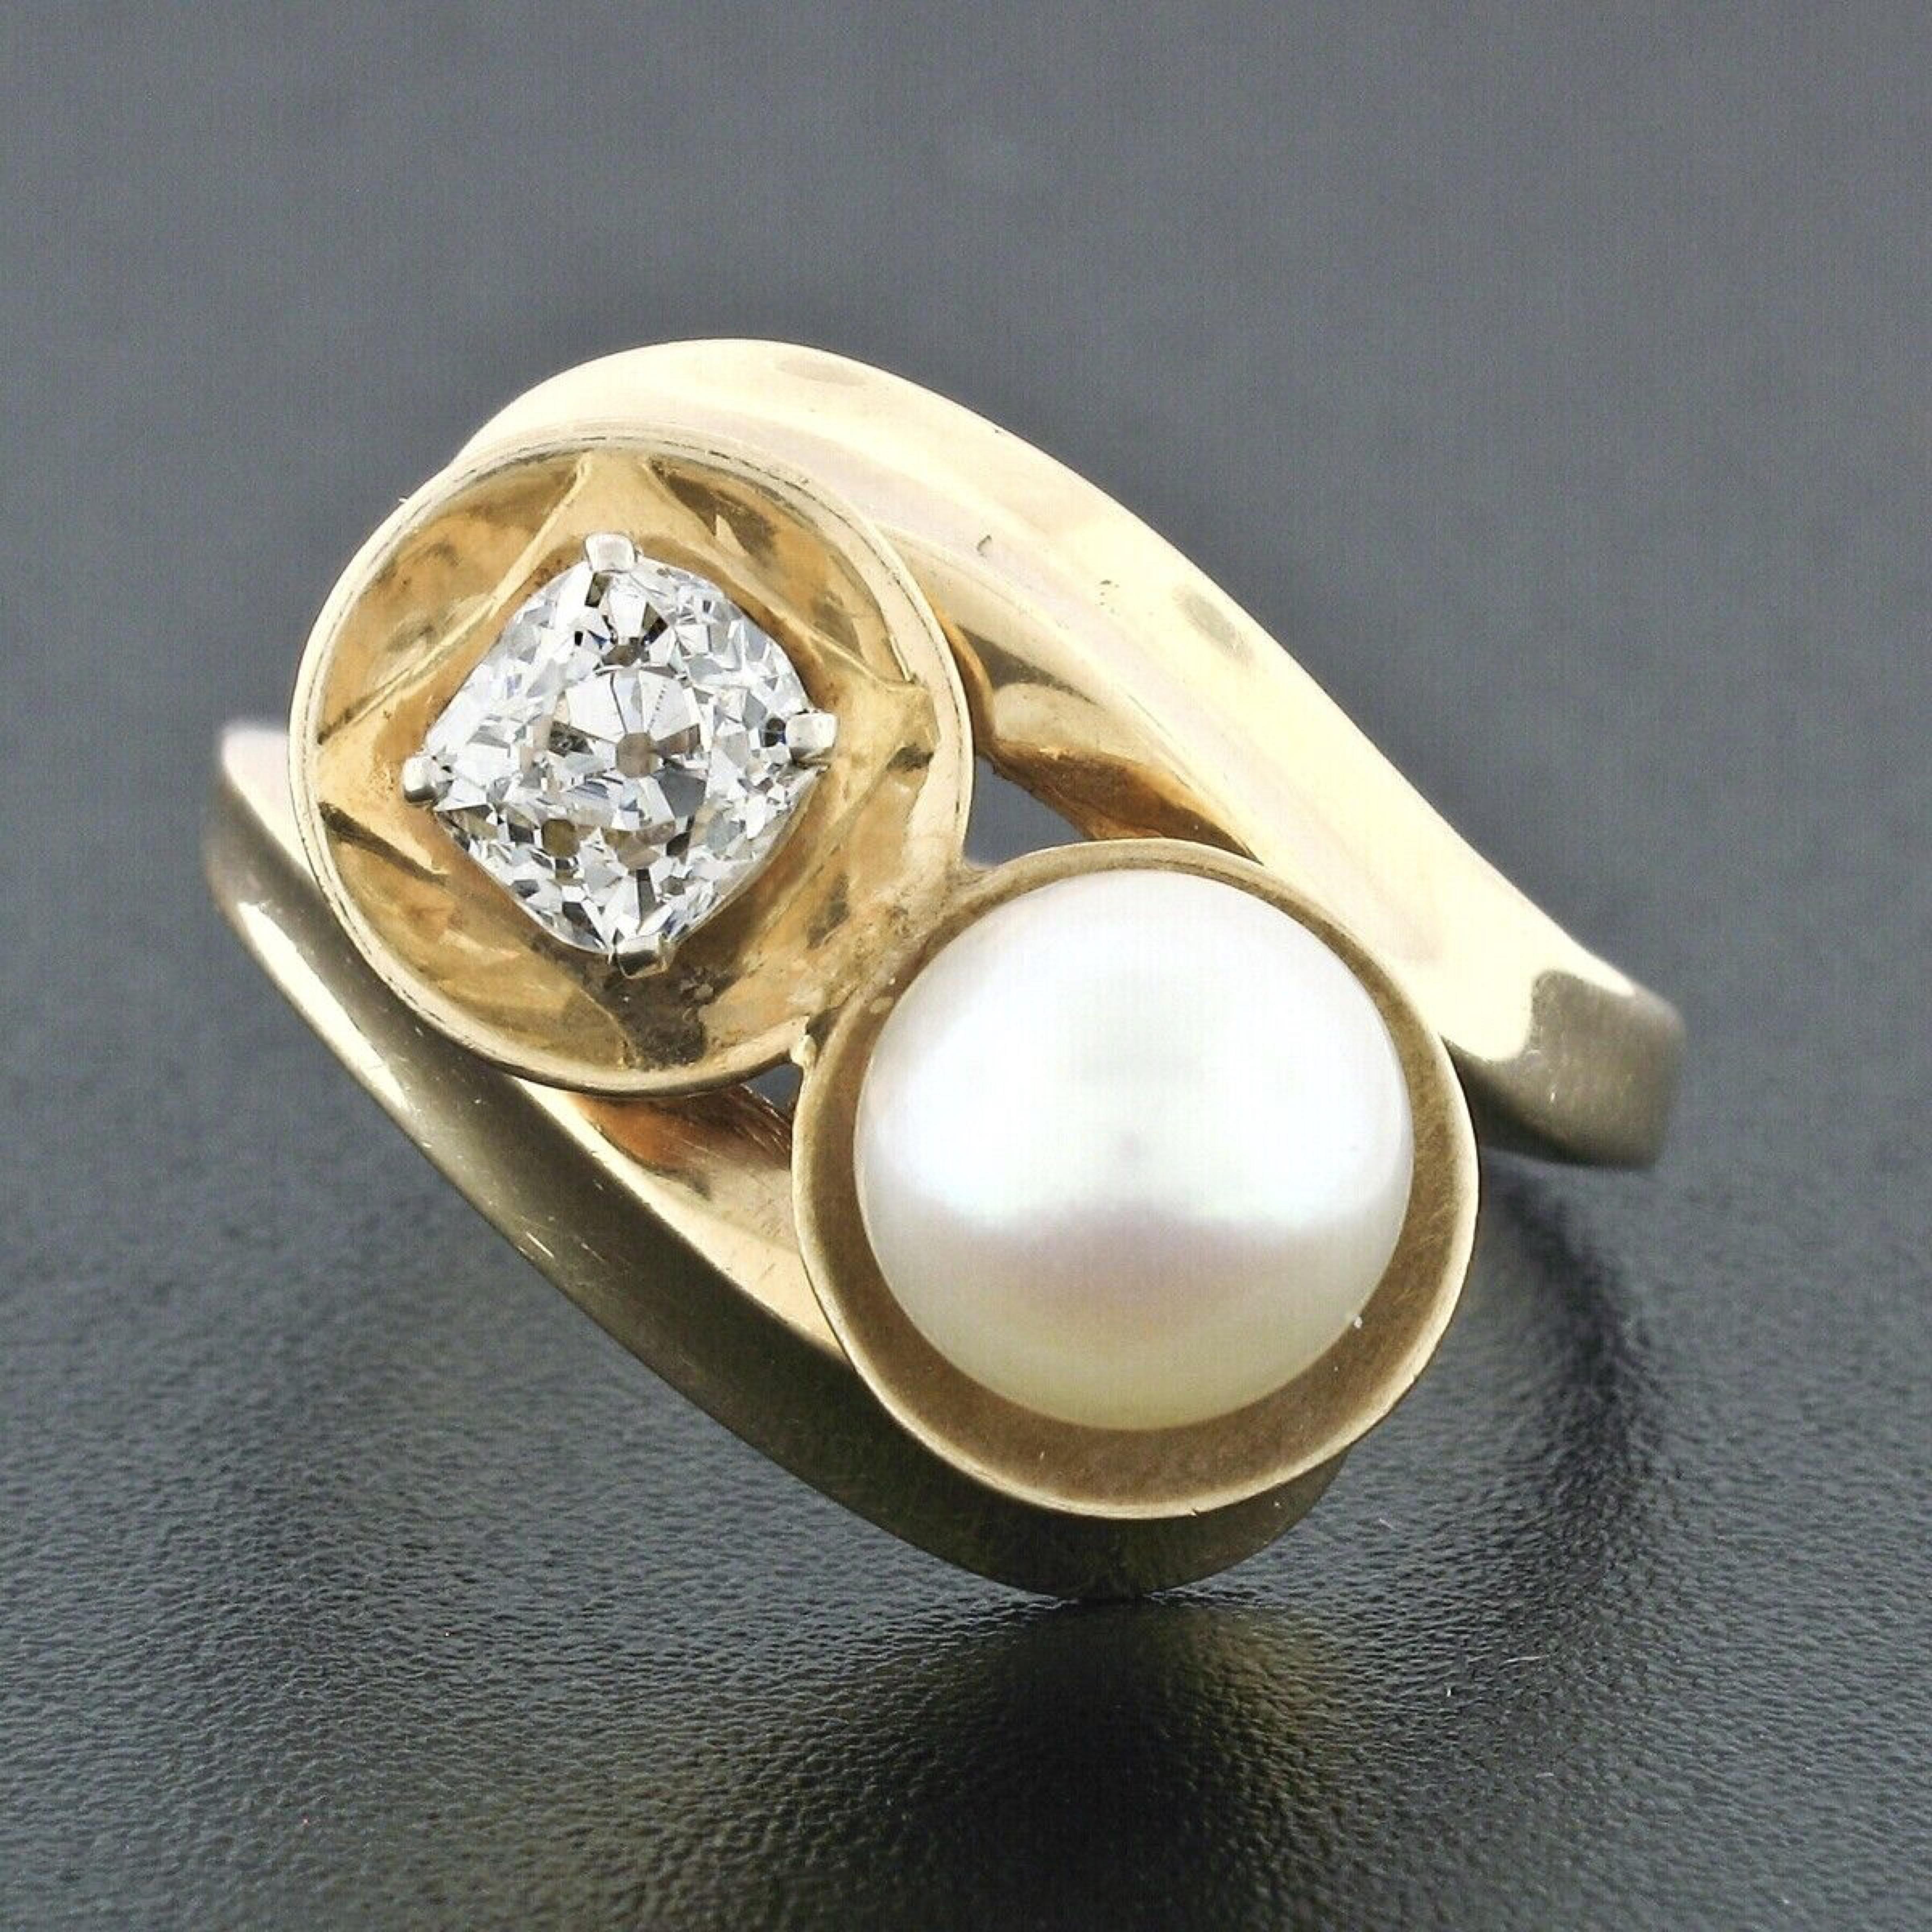 Here we have a handmade antique cocktail ring crafted in solid 14k yellow gold and features a fine quality pearl and an old cut diamond, both sitting on either side of the elegant bypass design. The beautiful pearl is round shaped with nice large